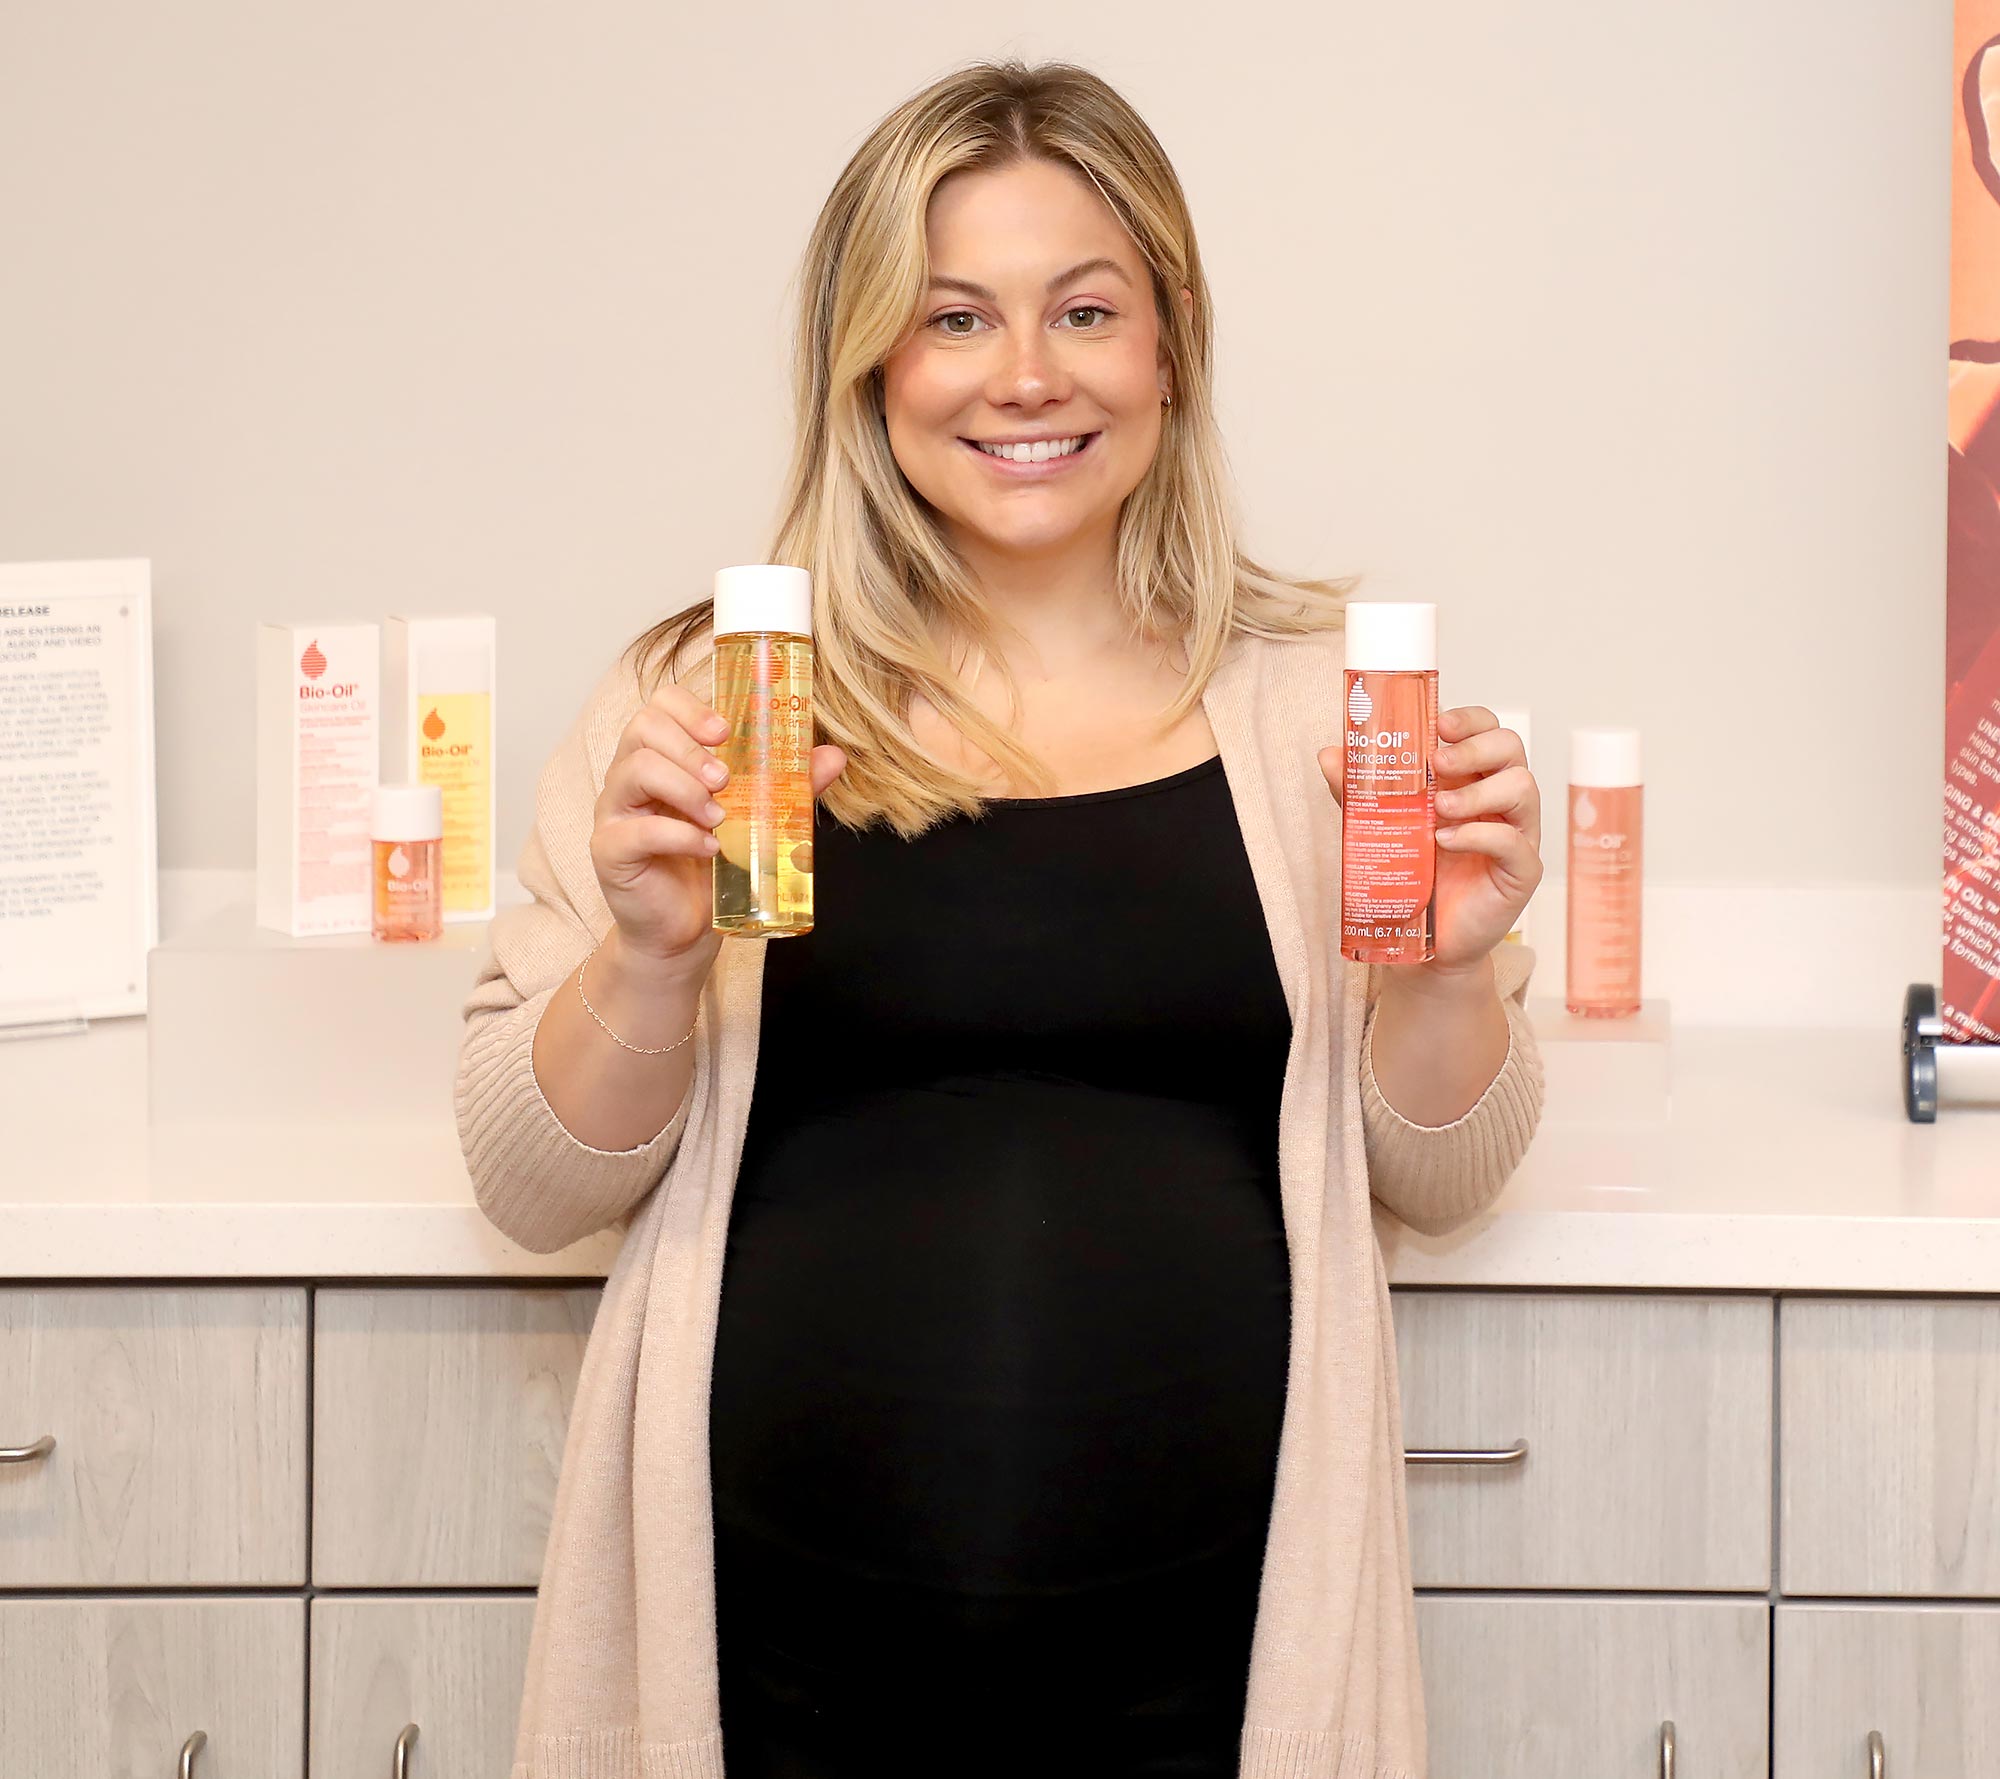 https://www.usmagazine.com/wp-content/uploads/2023/10/Shawn-Johnson-Credits-Bio-Oil-for-Helping-Keep-Her-Pregnant-Belly-Stretch-Mark-Free1.jpg?quality=86&strip=all